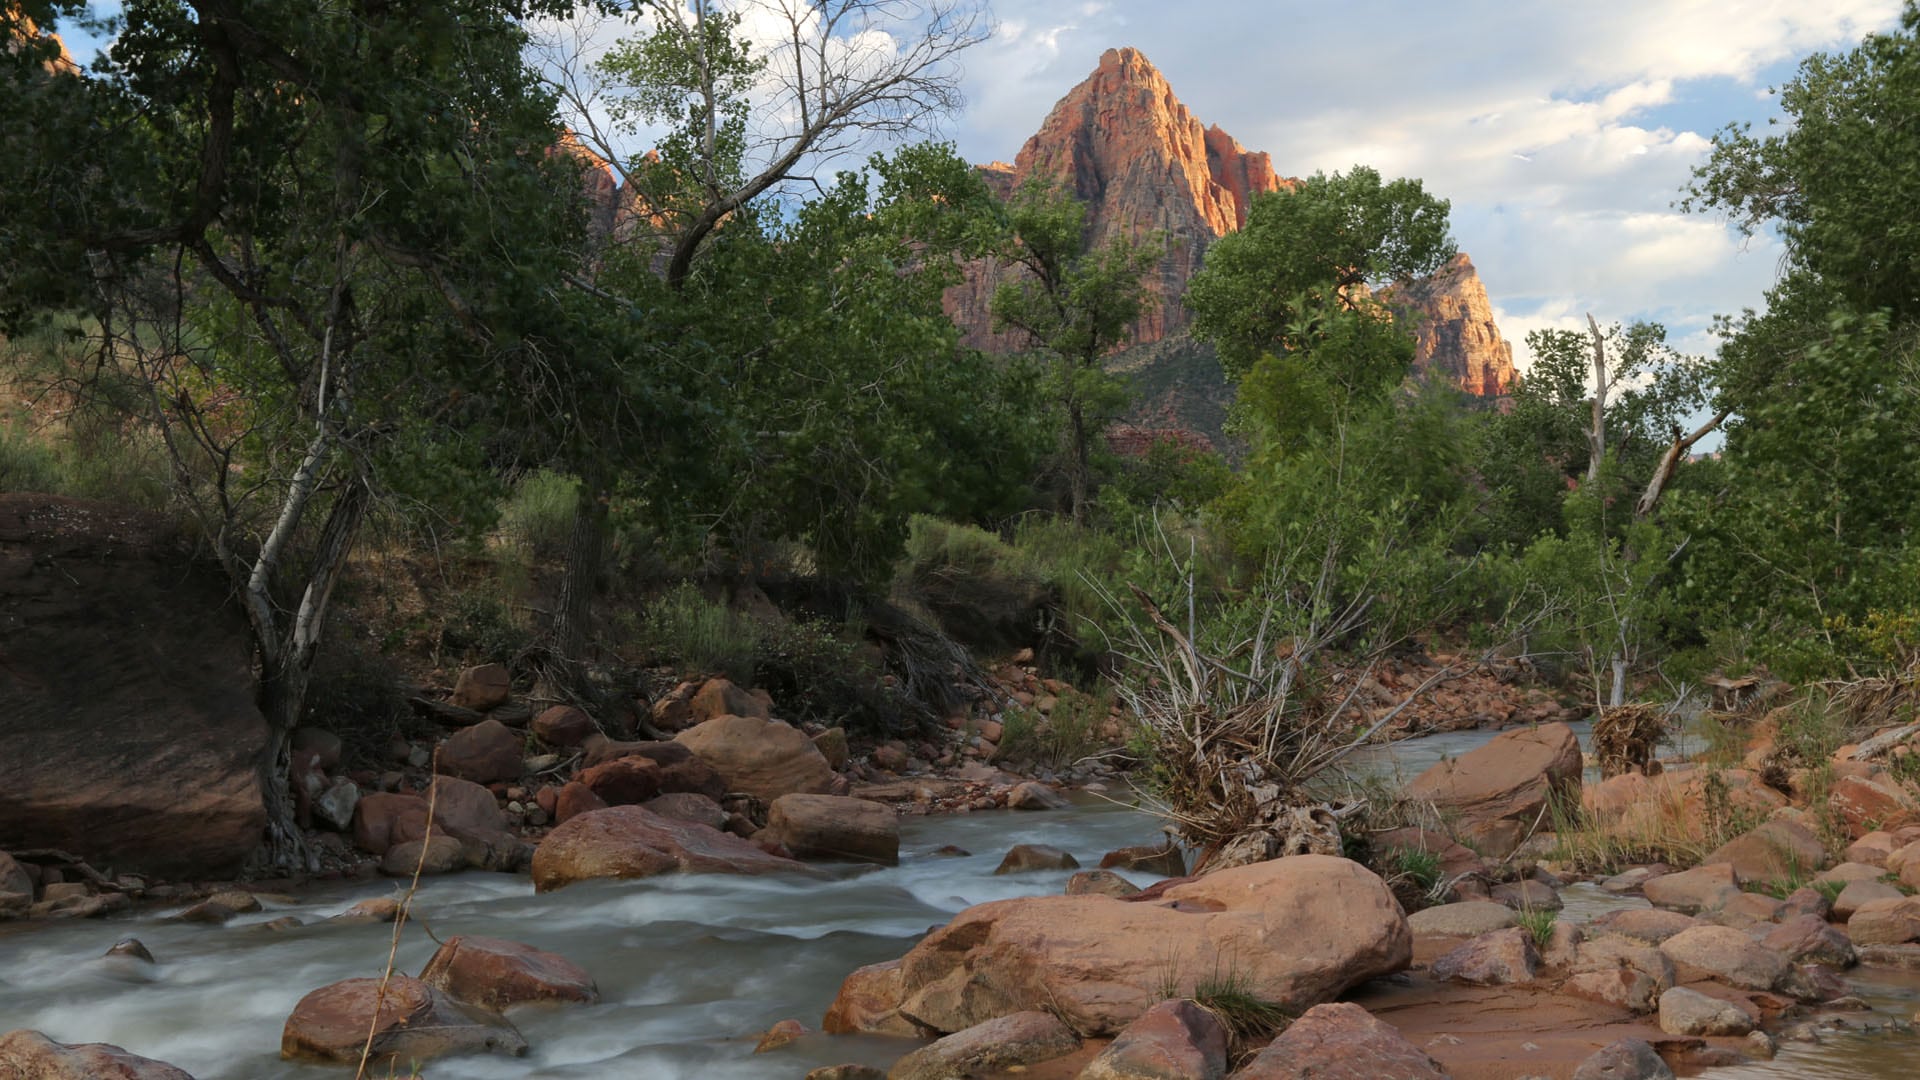 Road Trip to Zion National Park for Artistic Inspiration